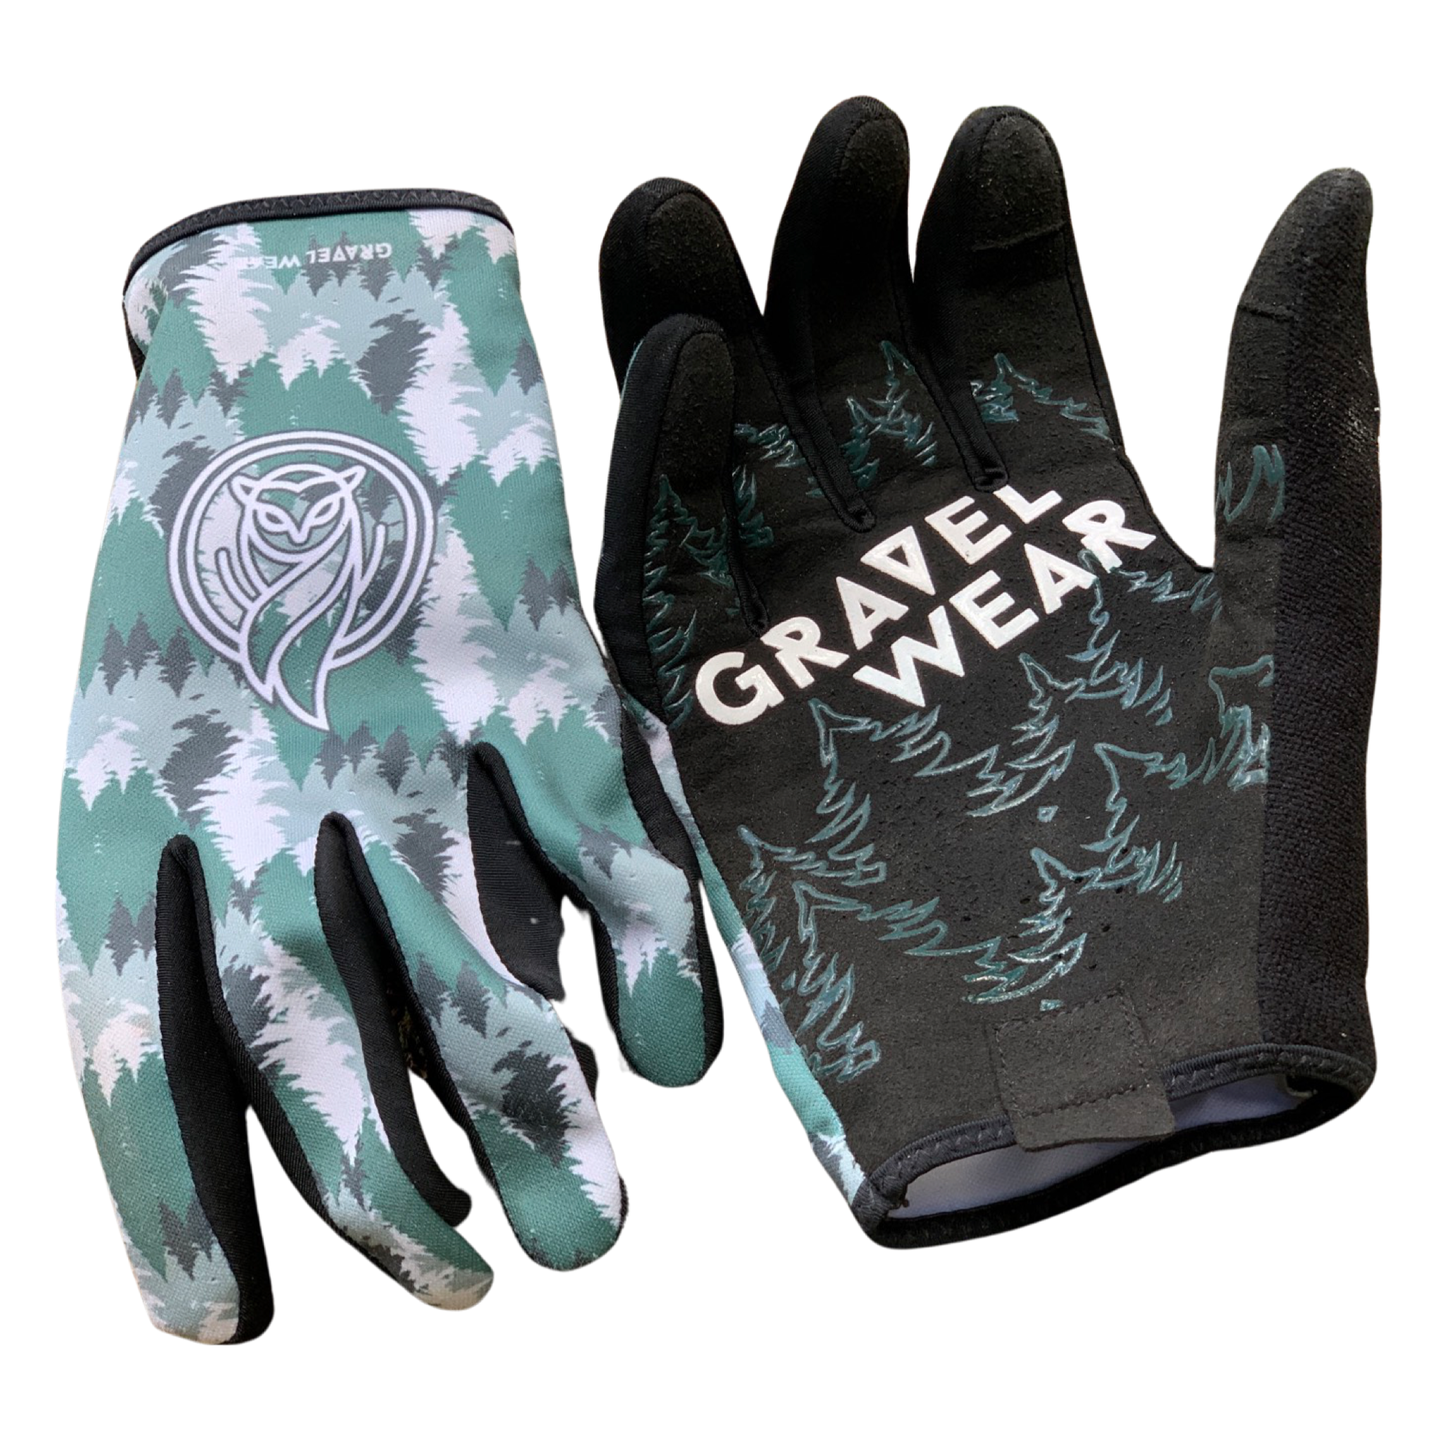 Gravel Gloves - Pine Creek Collection 